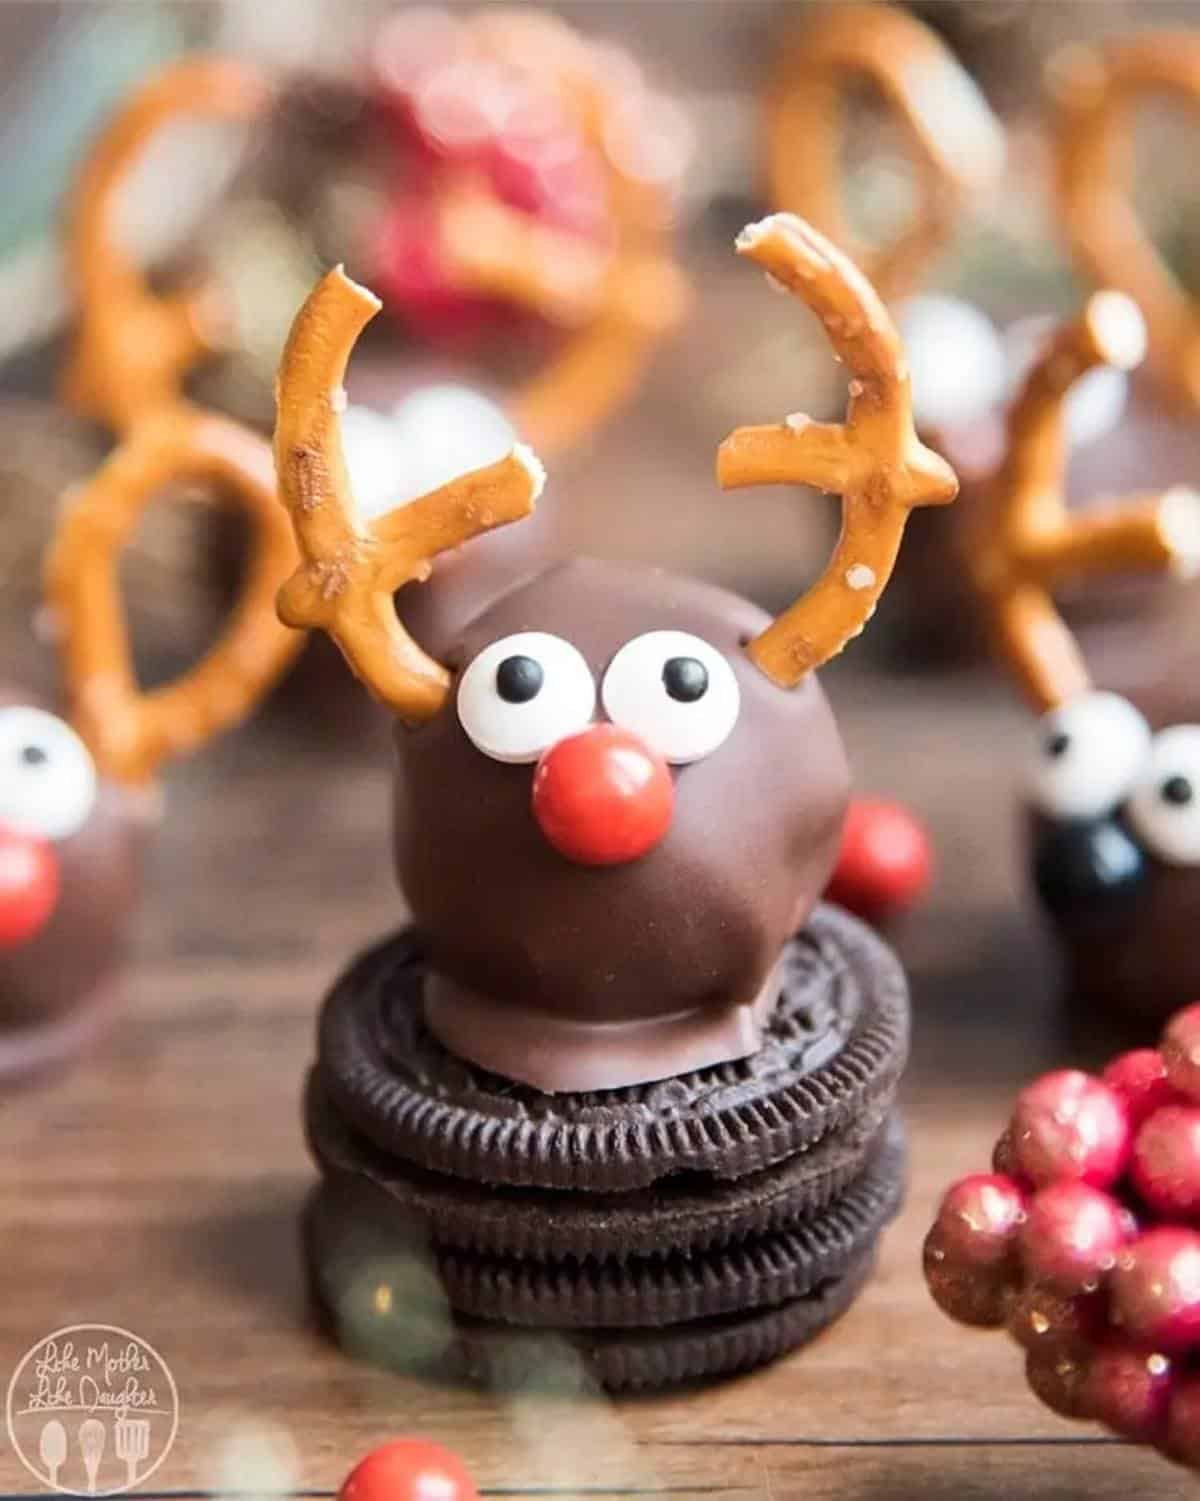 One-inch chocolate ball with googly eyes, a red nose, and pretzel antlers that looks like a reindeer sitting atop an oreo cookie.